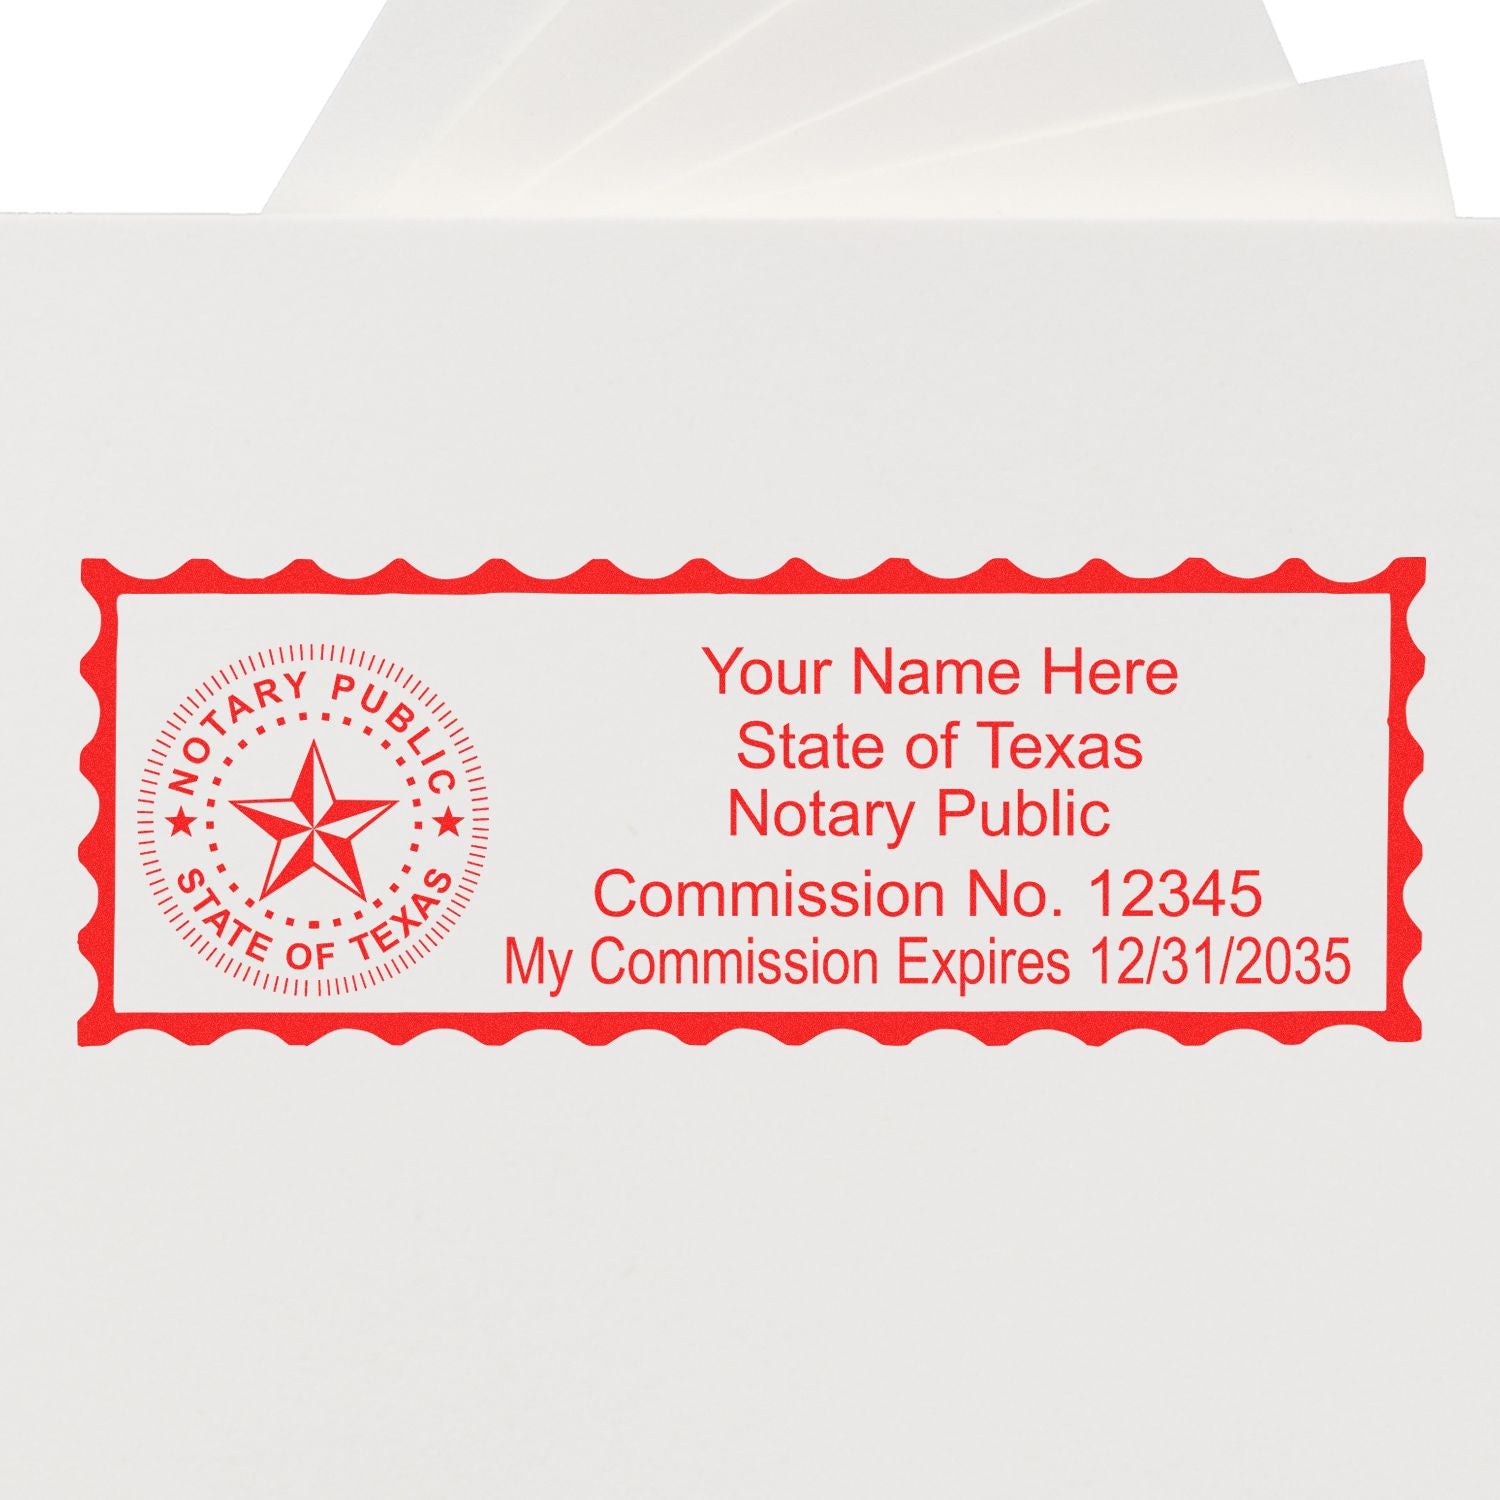 The main image for the PSI Texas Notary Stamp depicting a sample of the imprint and electronic files